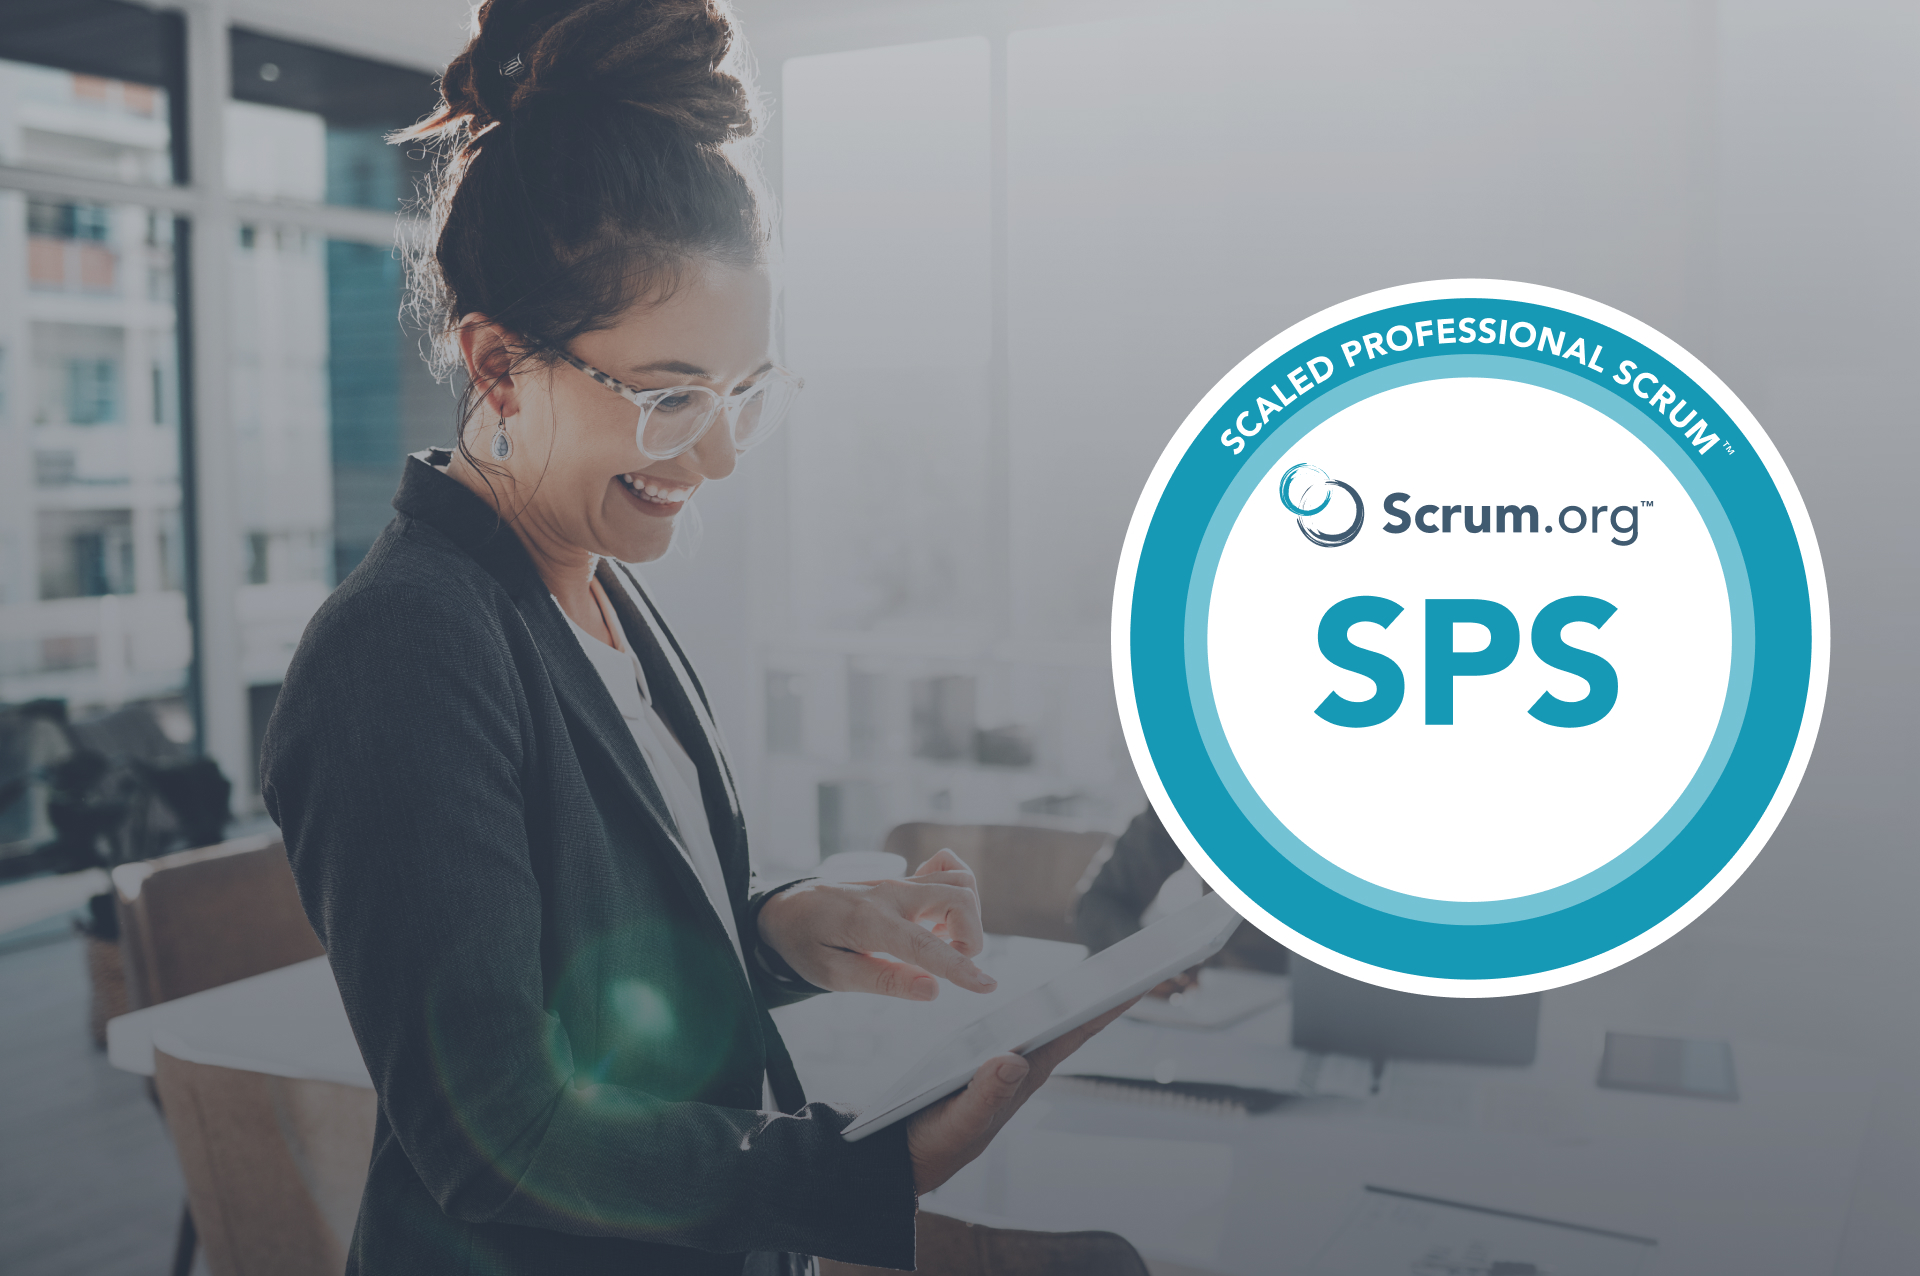 SPS - Scaled Professional Scrum ™